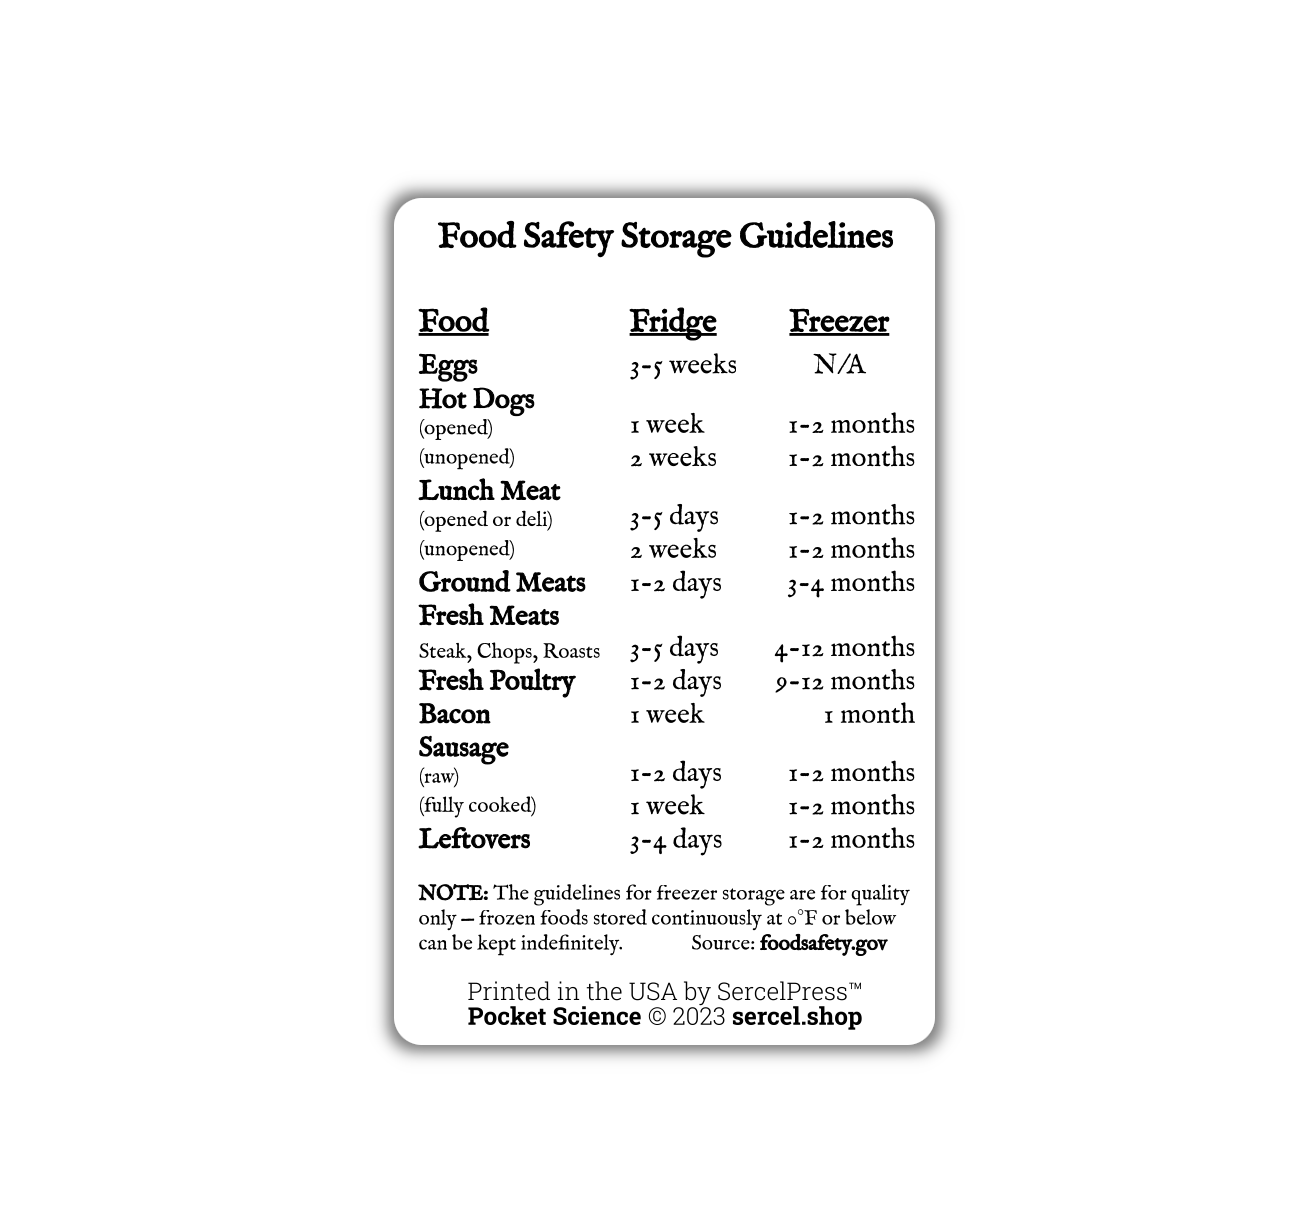 Food Safety Storage Guidelines Reference Card | Durable Wallet Pocket Reference Card | Pocket Science, Kitchen